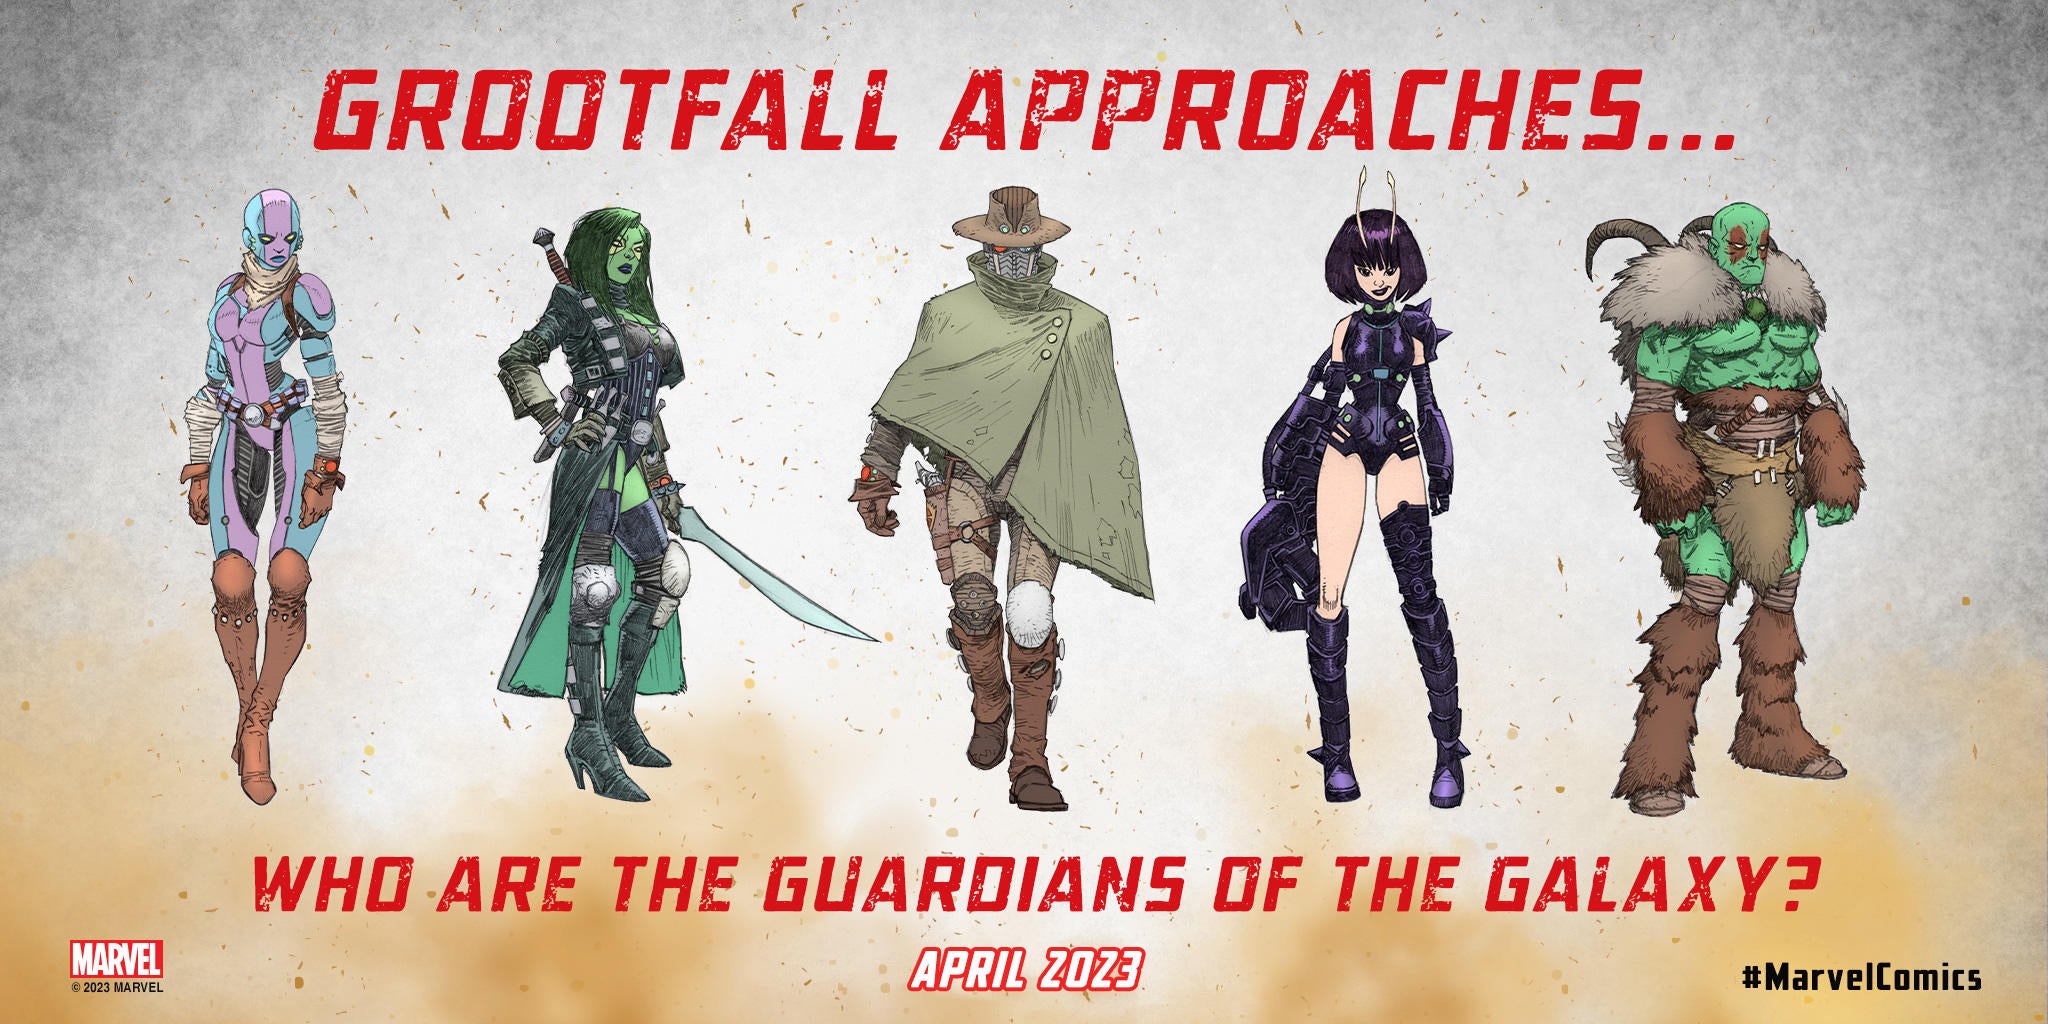 who-are-the-guardians-of-the-galaxy-grootfall-approaches.jpg